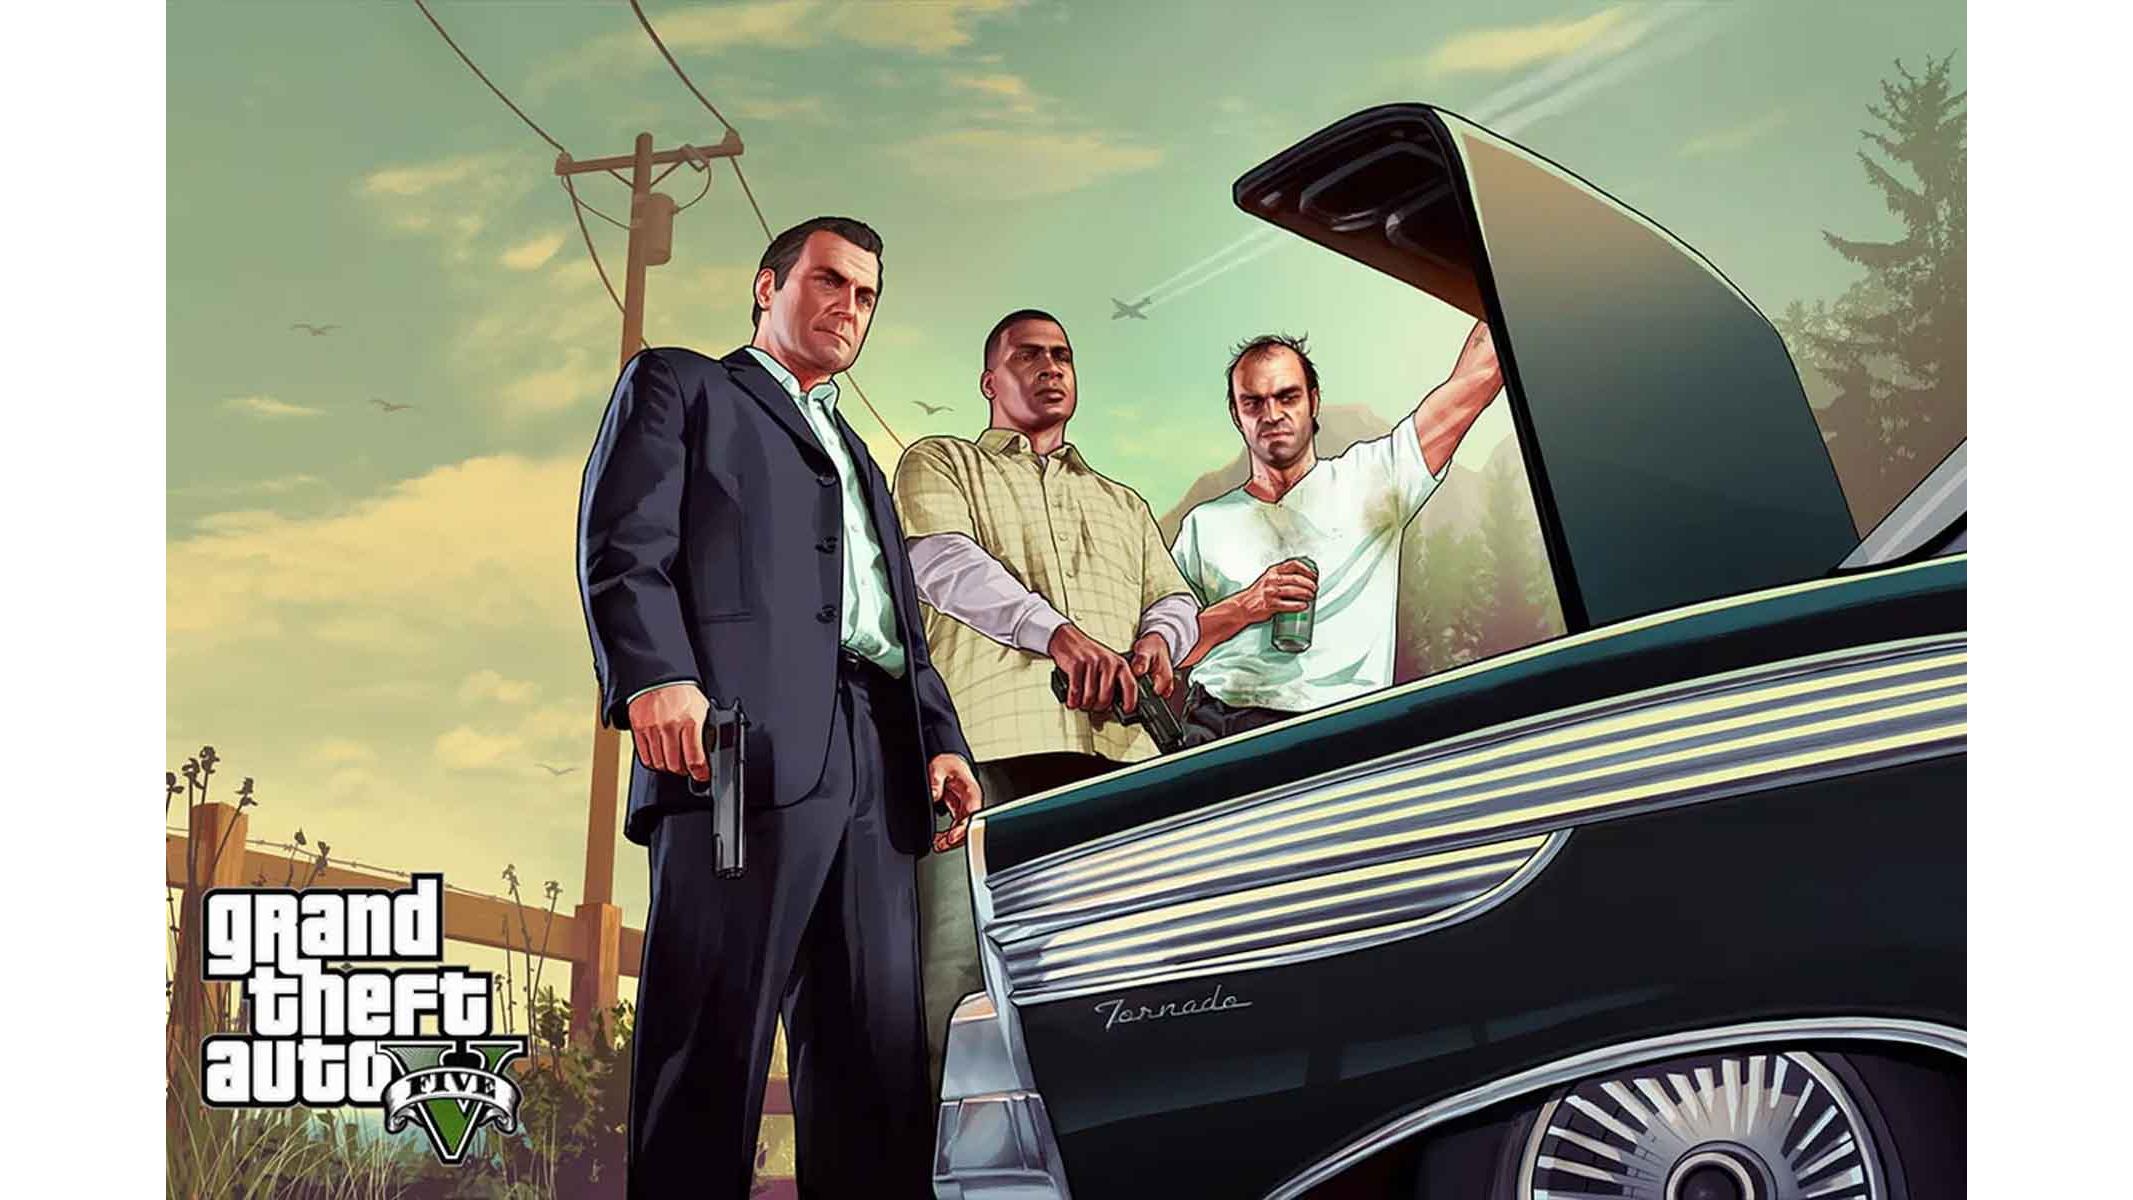 Potential GTA 6 Leak Emerges on Social Media Ahead of Official Trailer